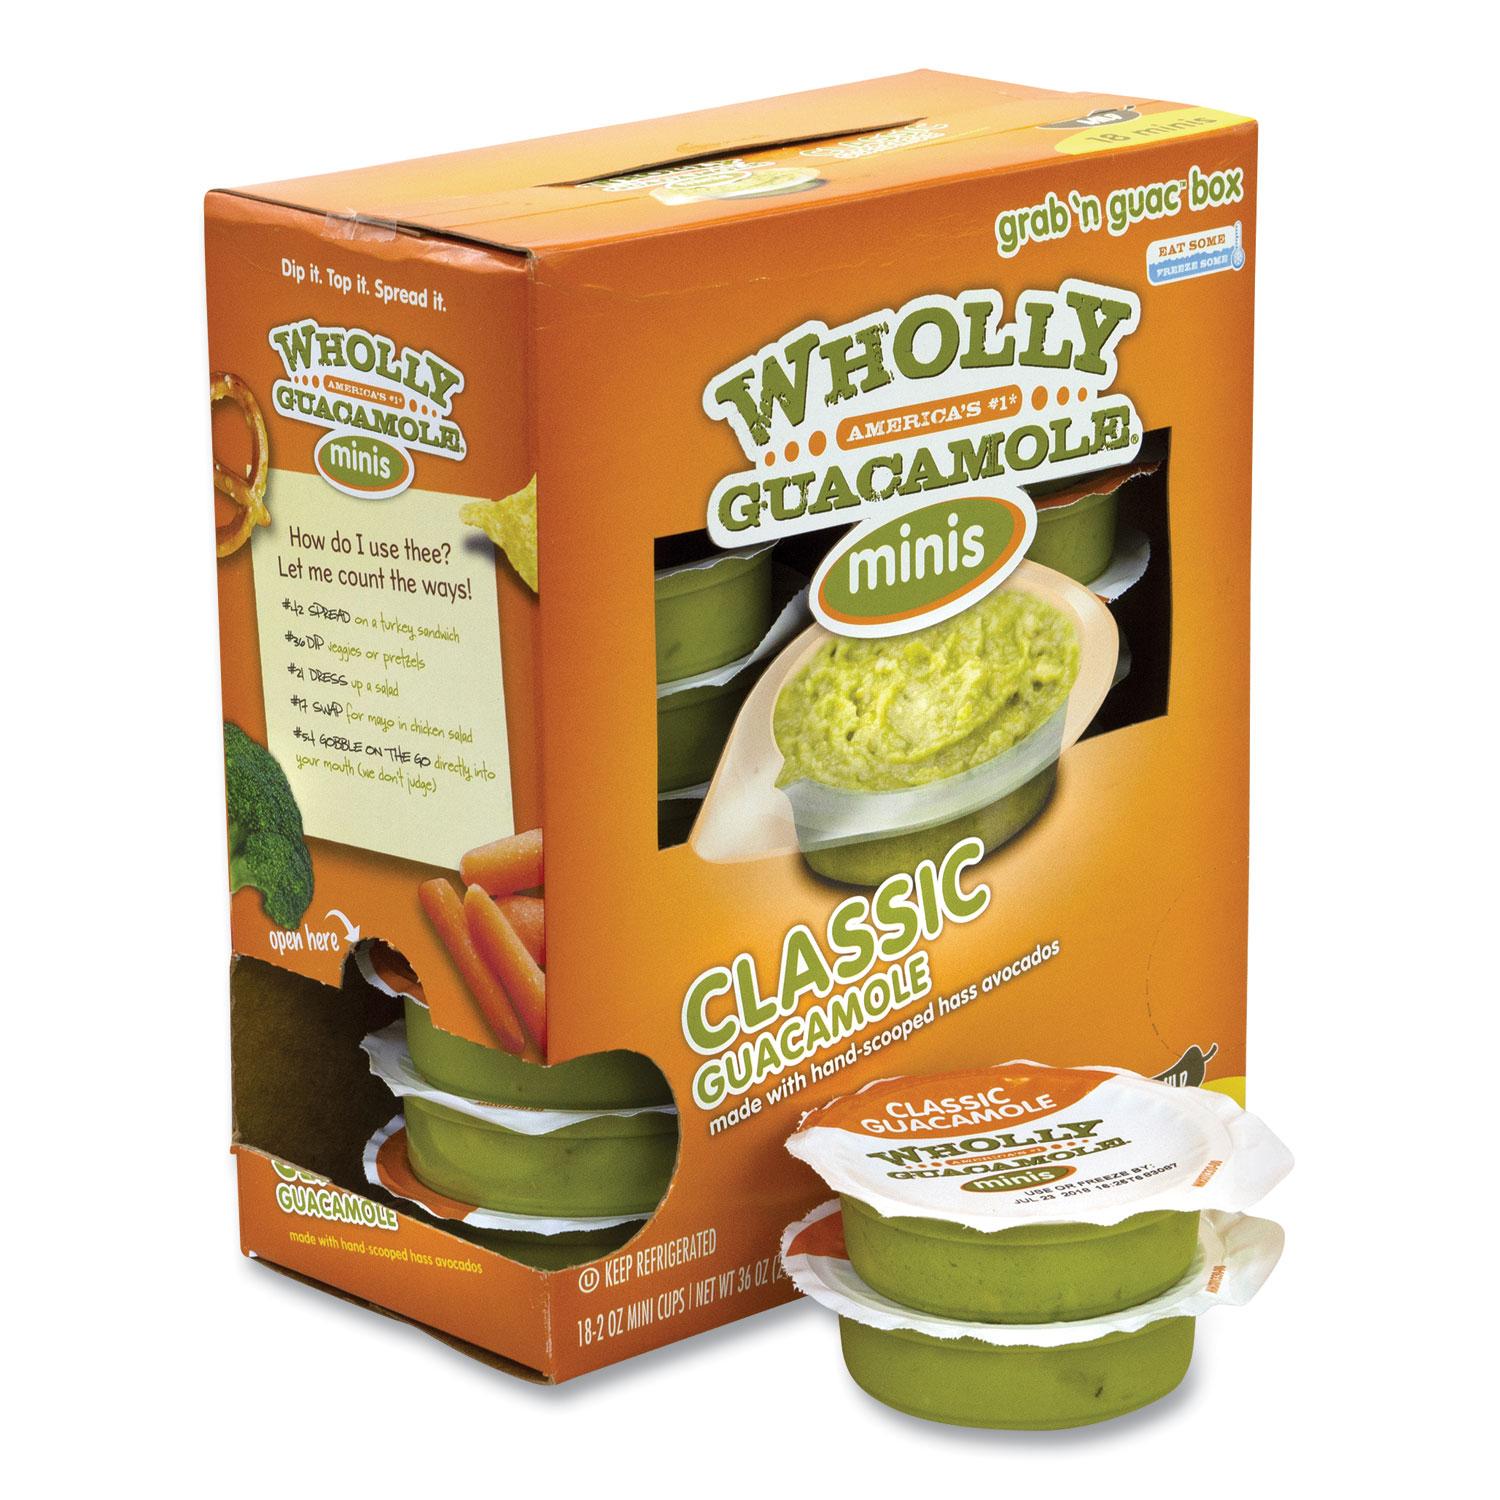  Wholly Guacamole 820902 Minis, Classic Guacamole, Mild, 2 oz Cup, 18 Cups/Box, Free Delivery in 1-4 Business Days (GRR90200112) 